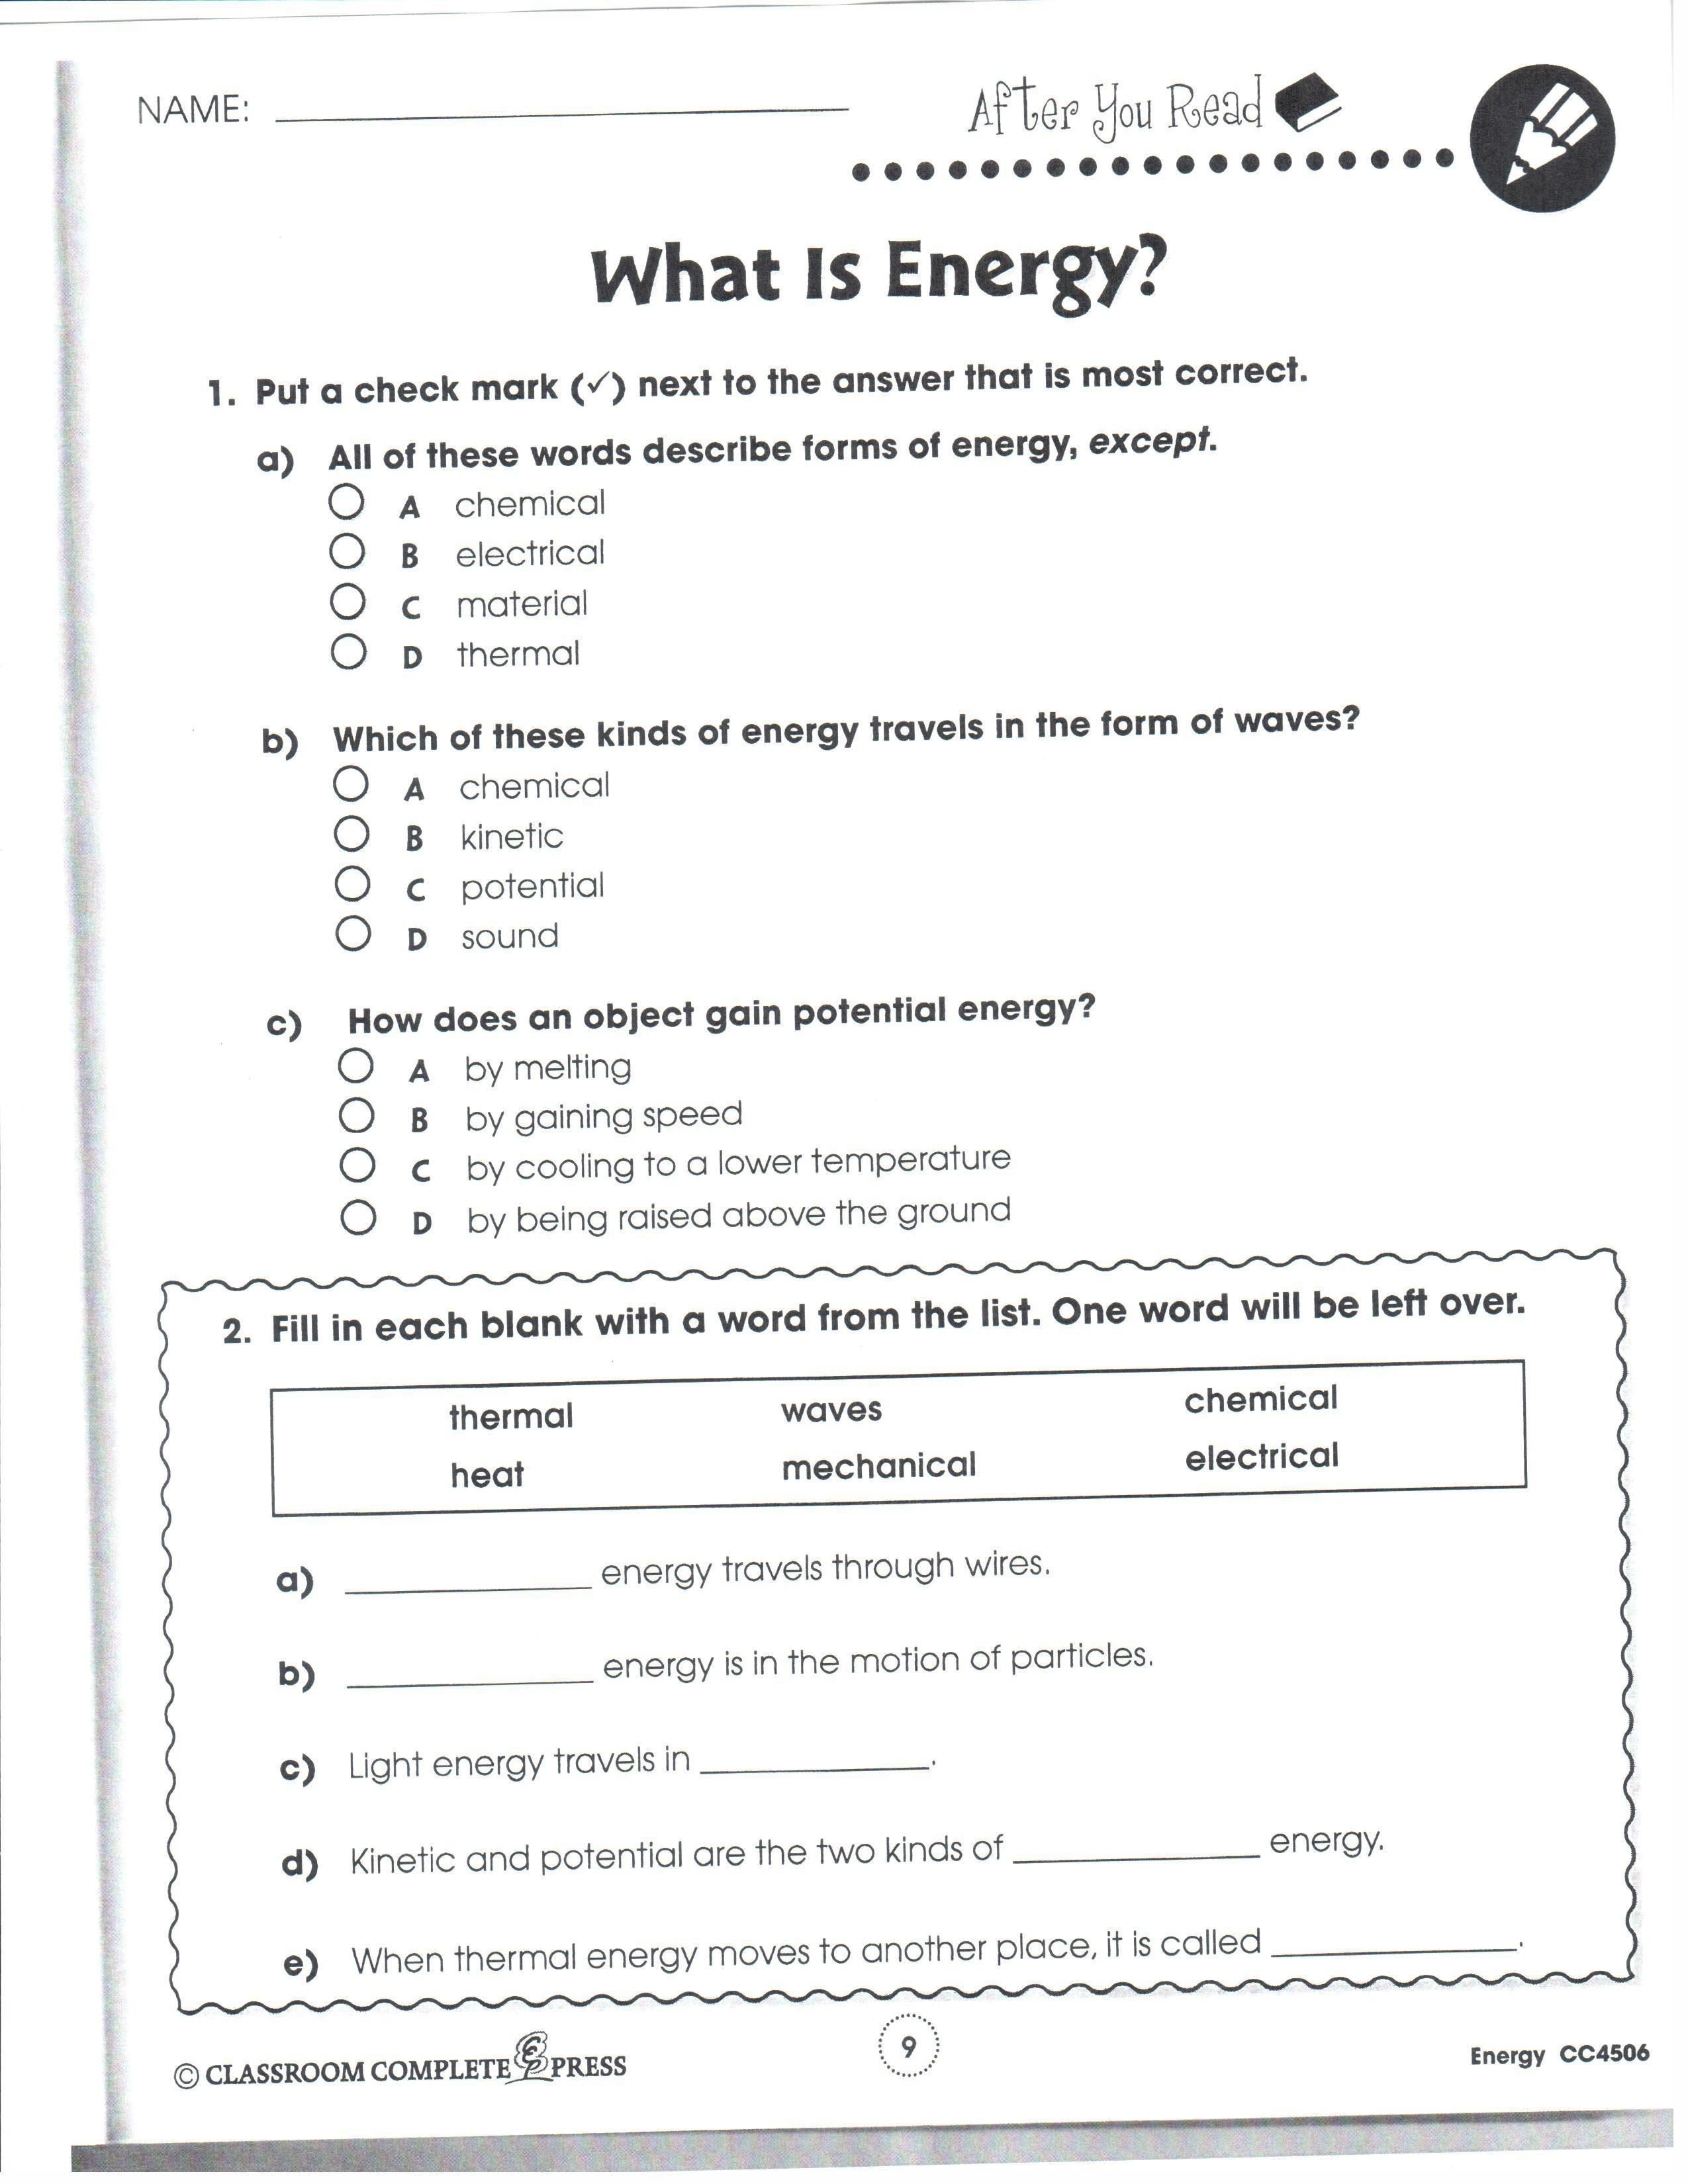 This Is A Reading Comprehension Worksheet Intended To Help ...